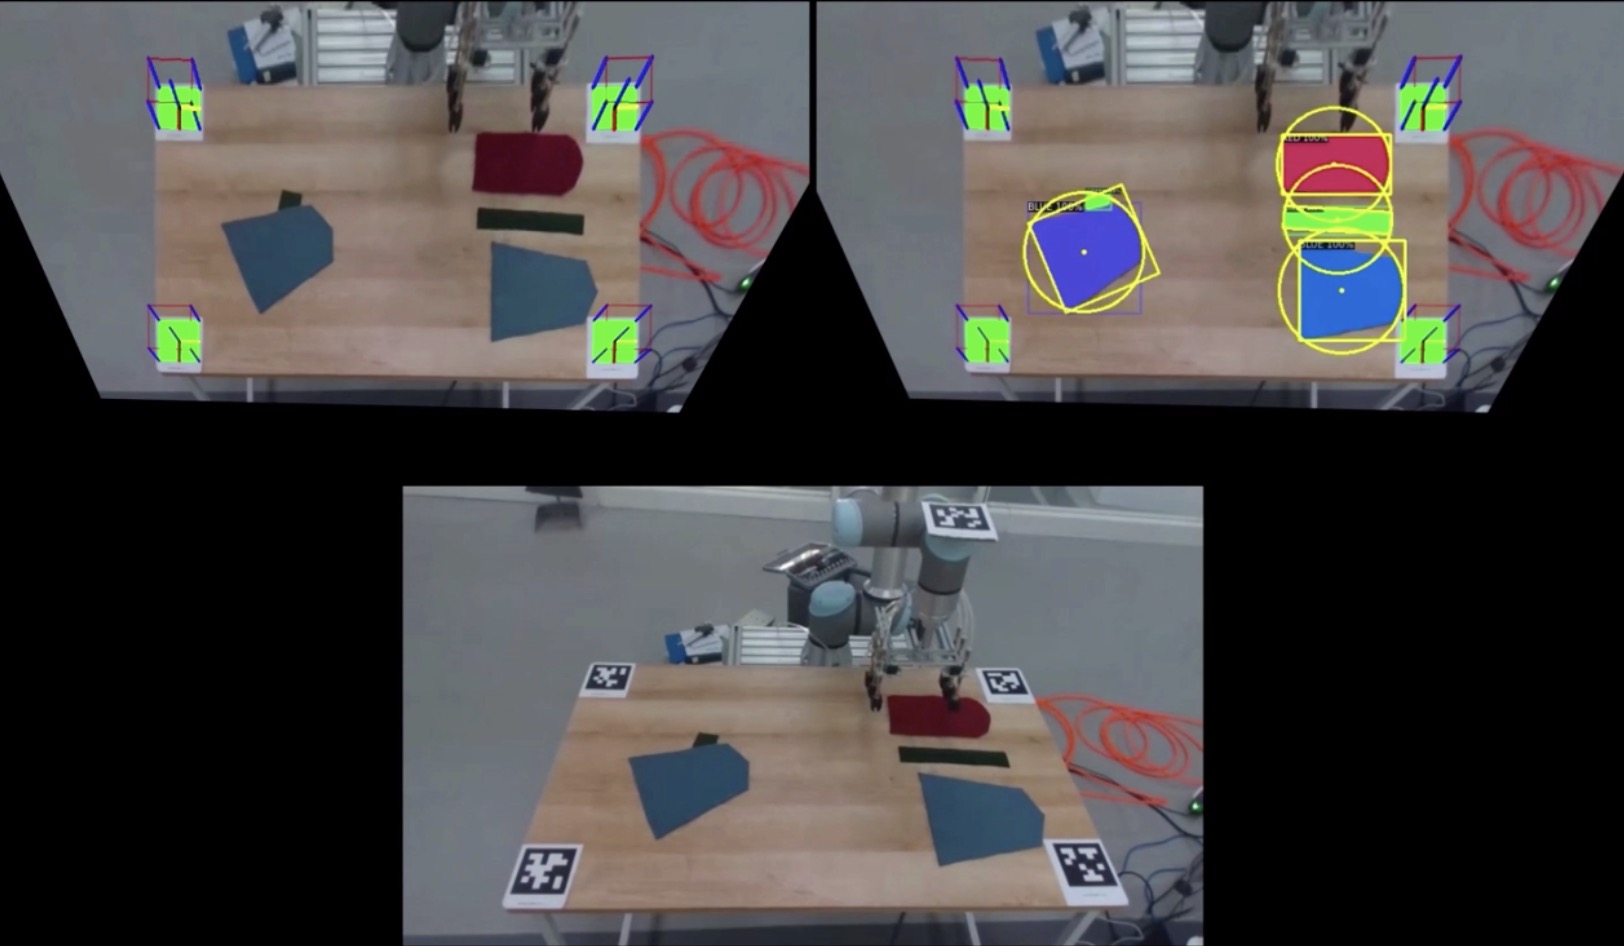 Cloth stacking in a human-machine collaborative environment